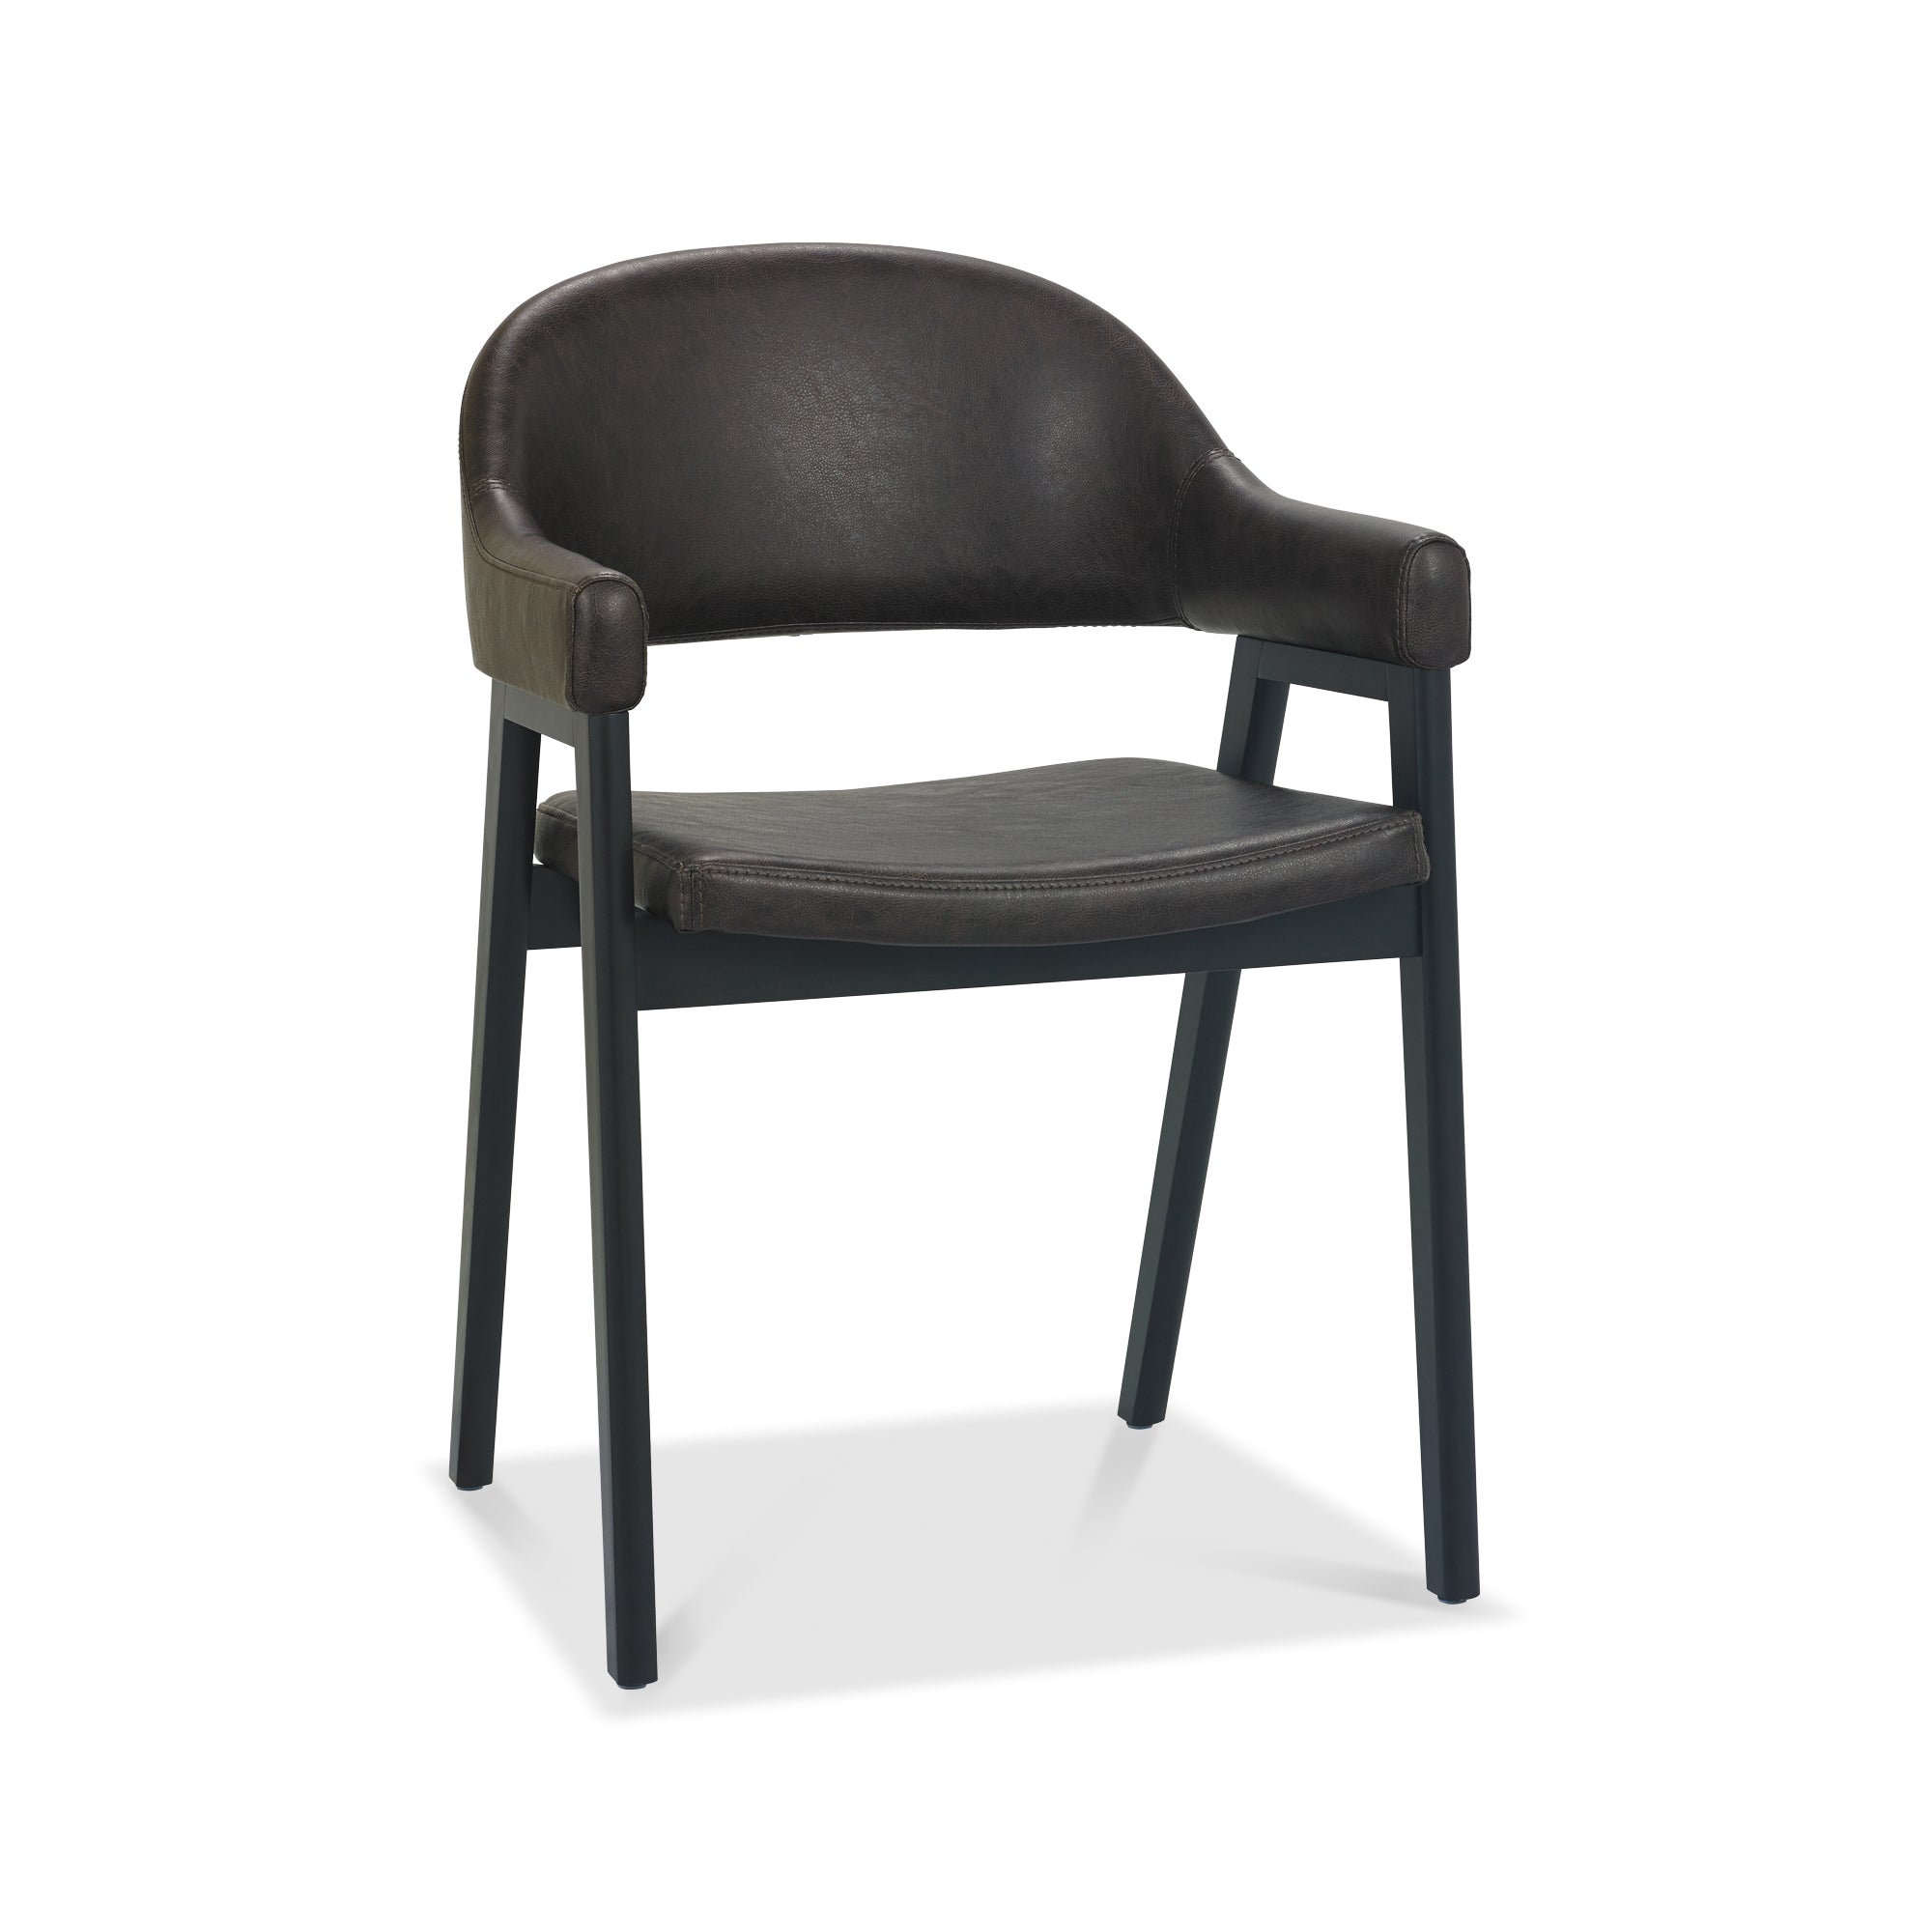 Candice Upholstered Dining Chair with Arms - Old West Vintage Bonded Leather